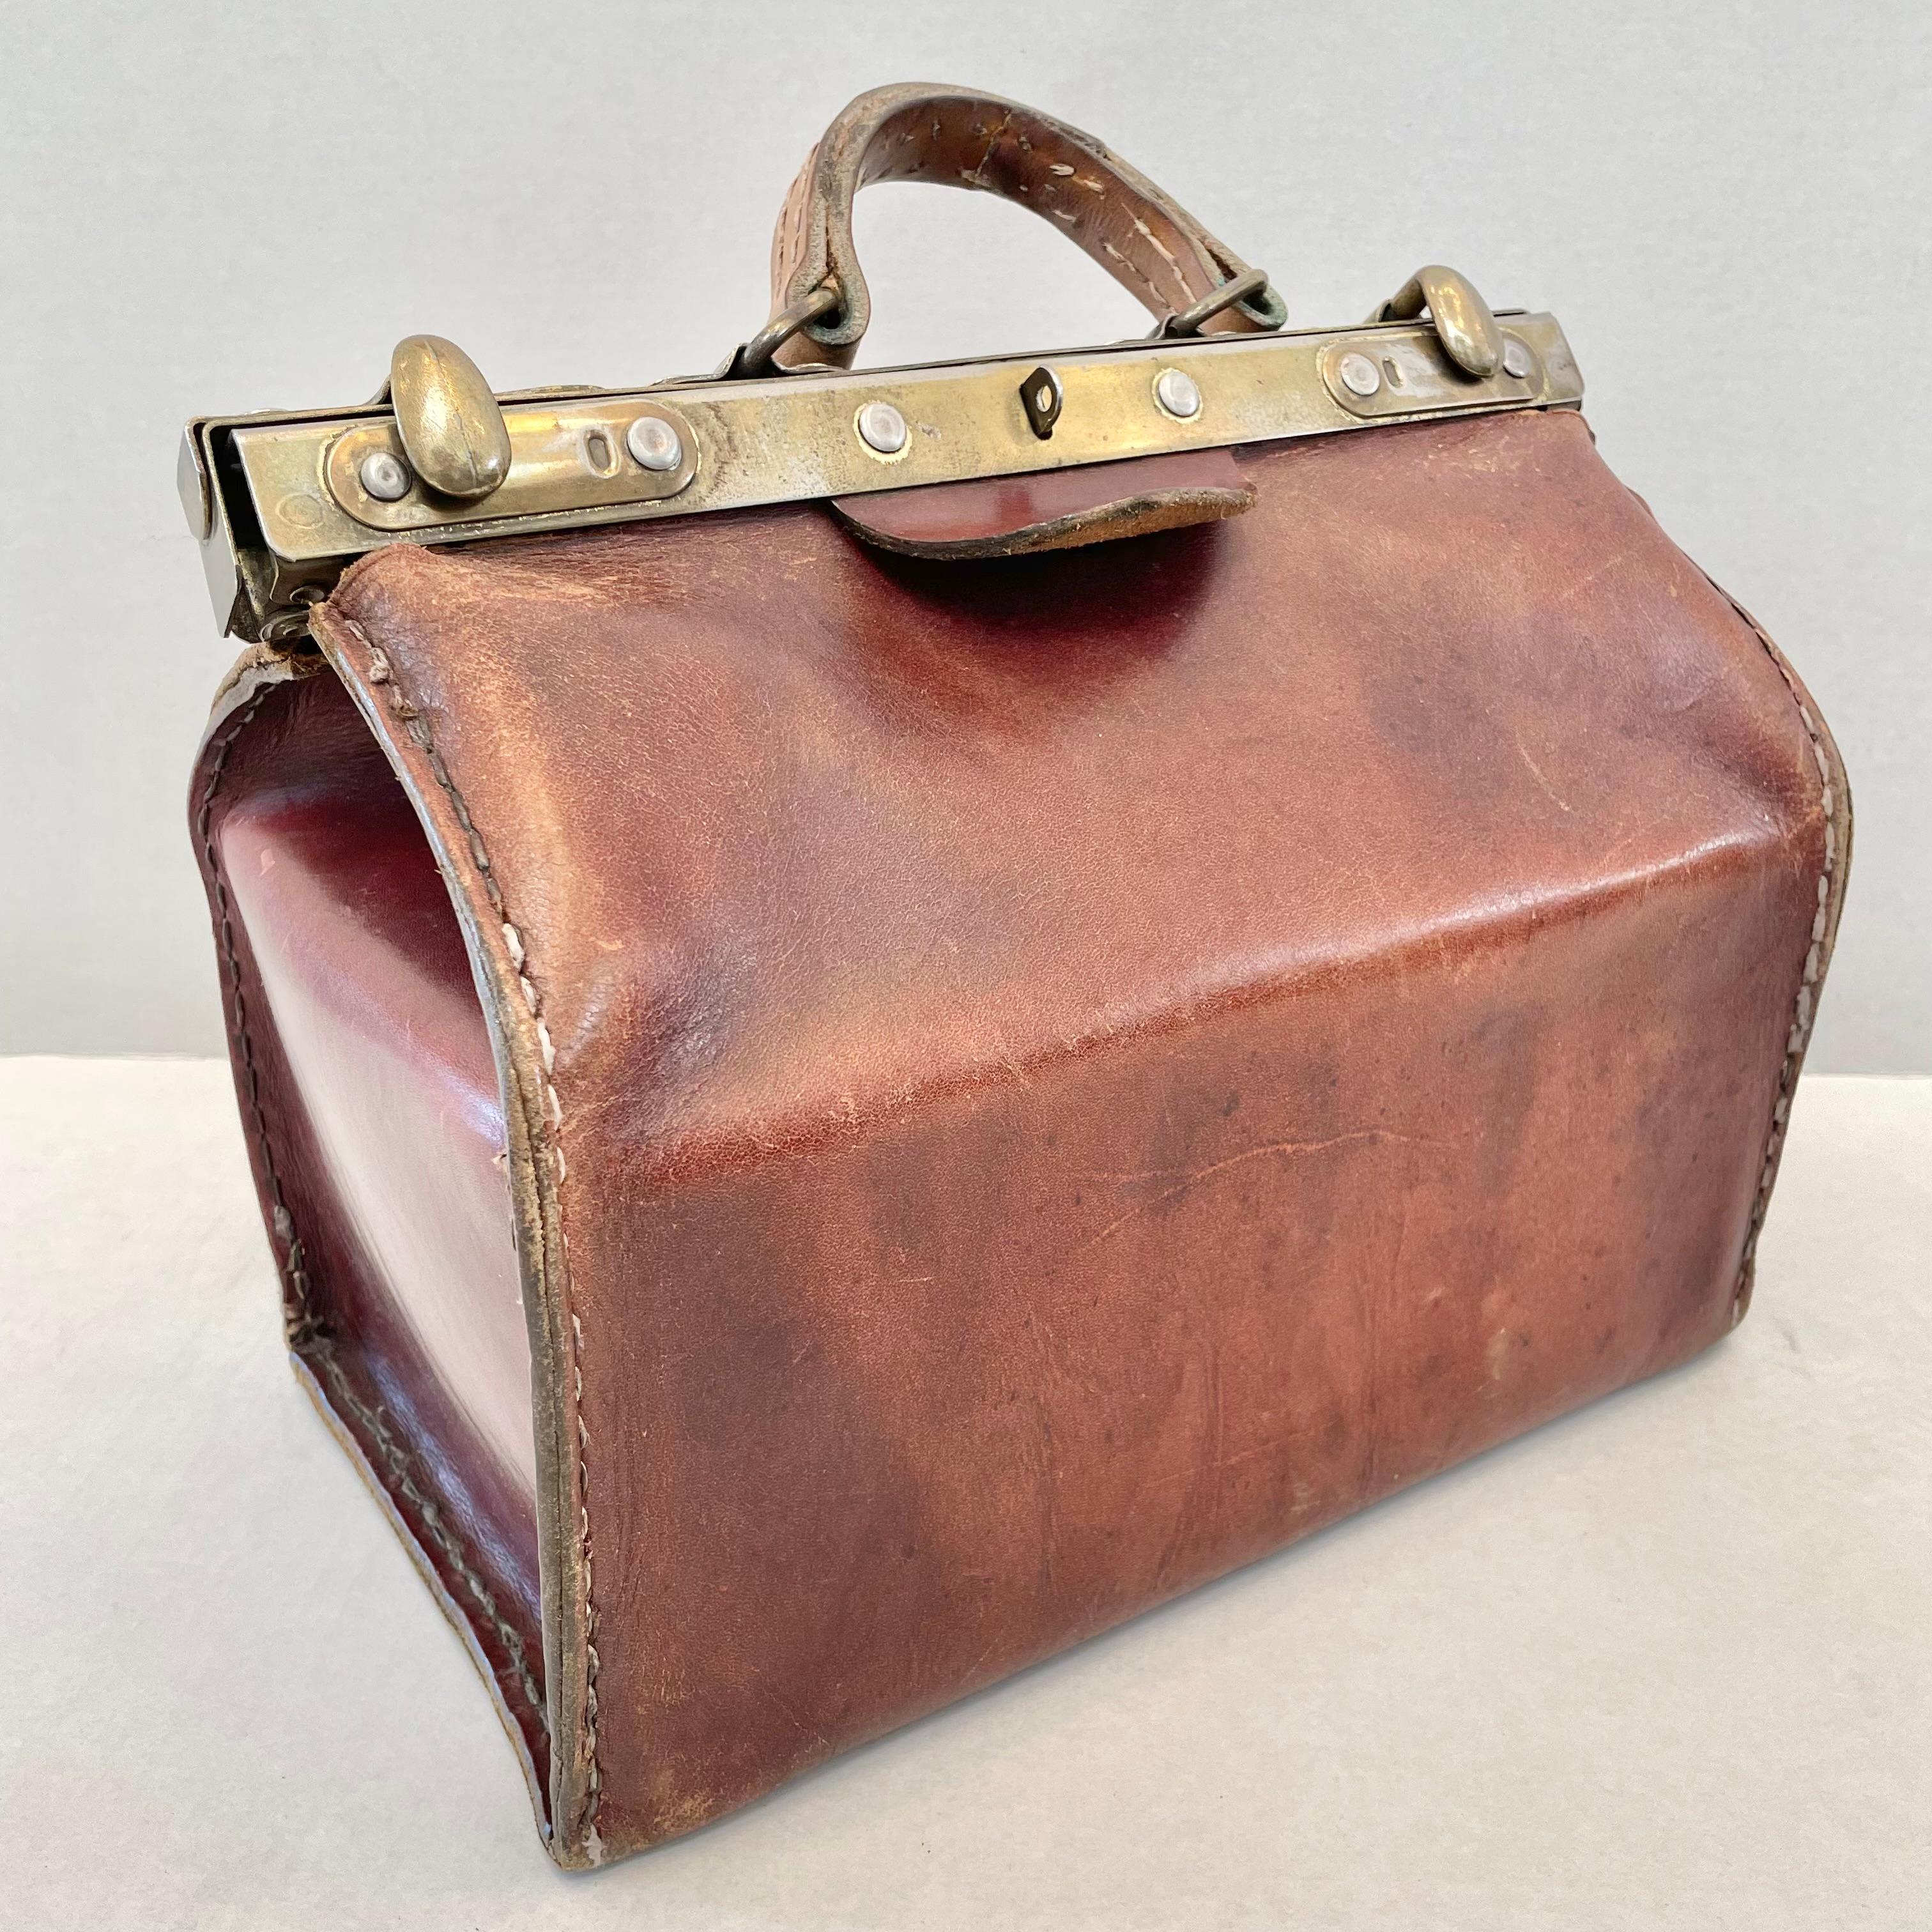 Substantial cowhide bag with brass hardware and closure. Used a travel bag for physicians to play tools and prescriptions in. Perfect as a purse or for travel. This structured bag is made with extremely thick saddle leather and brass hardware with a